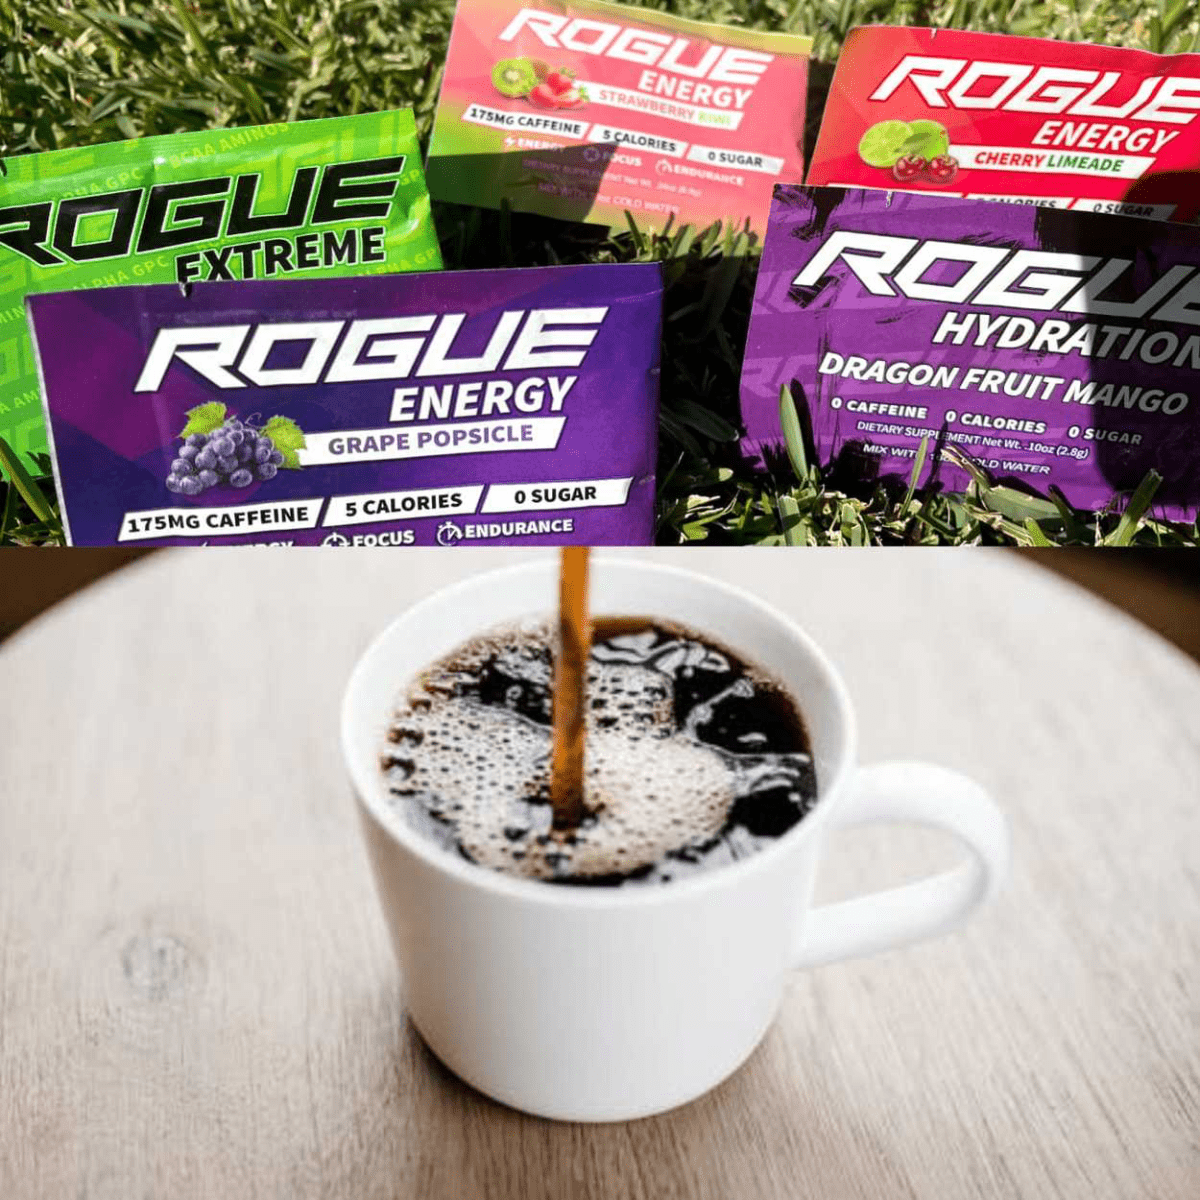 An image of coffee and rogue